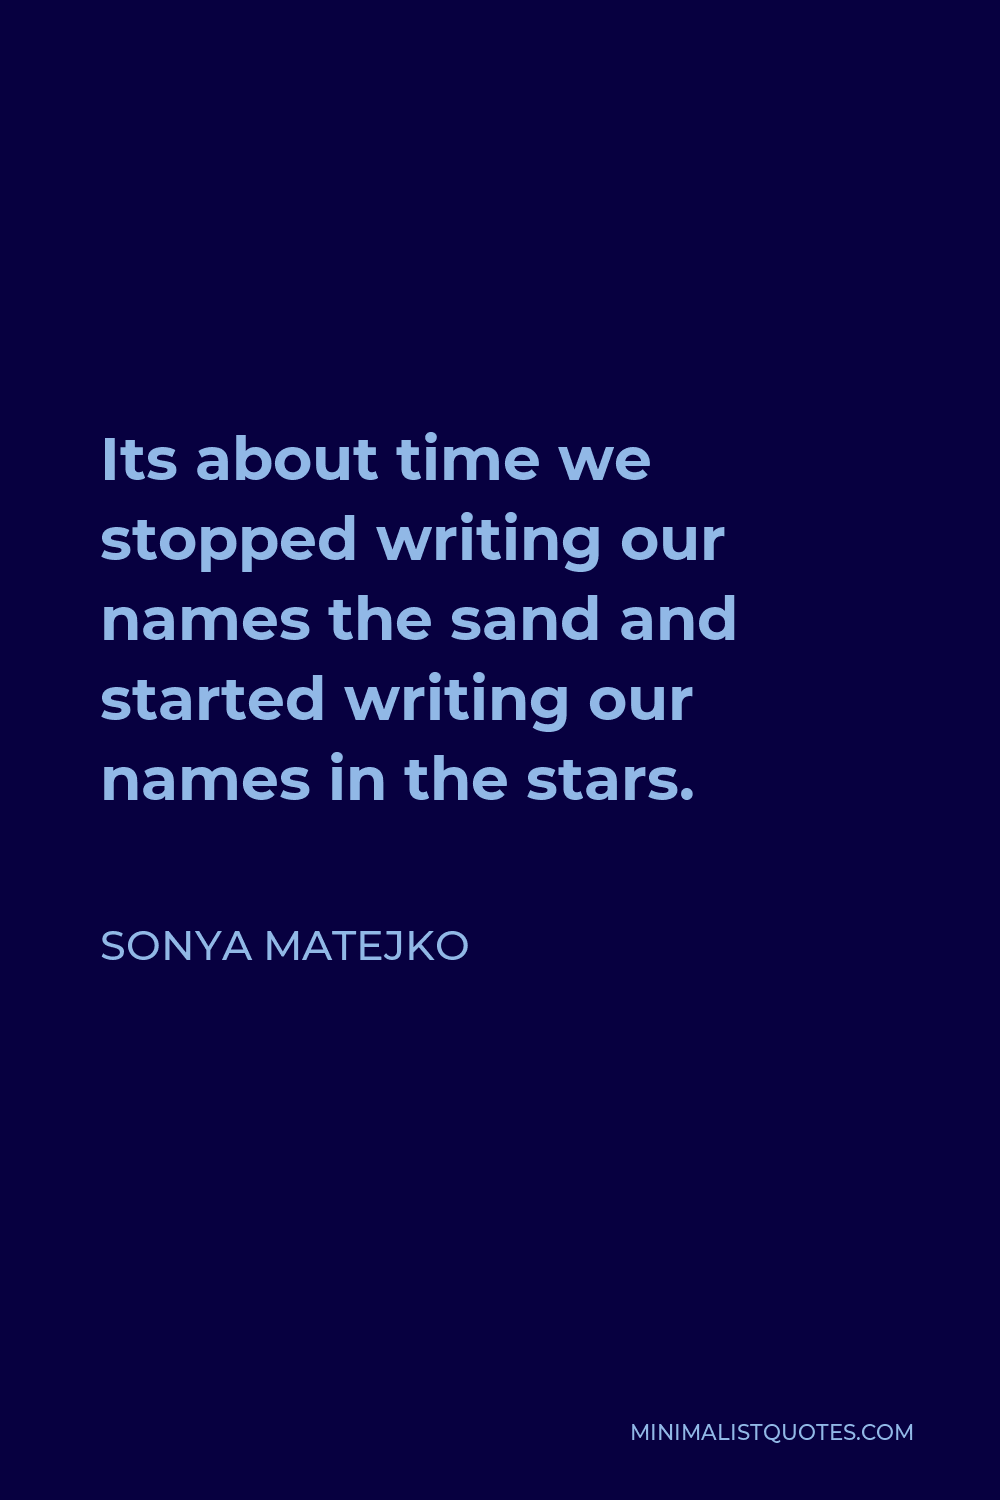 Sonya Matejko Quote - Its about time we stopped writing our names the sand and started writing our names in the stars.